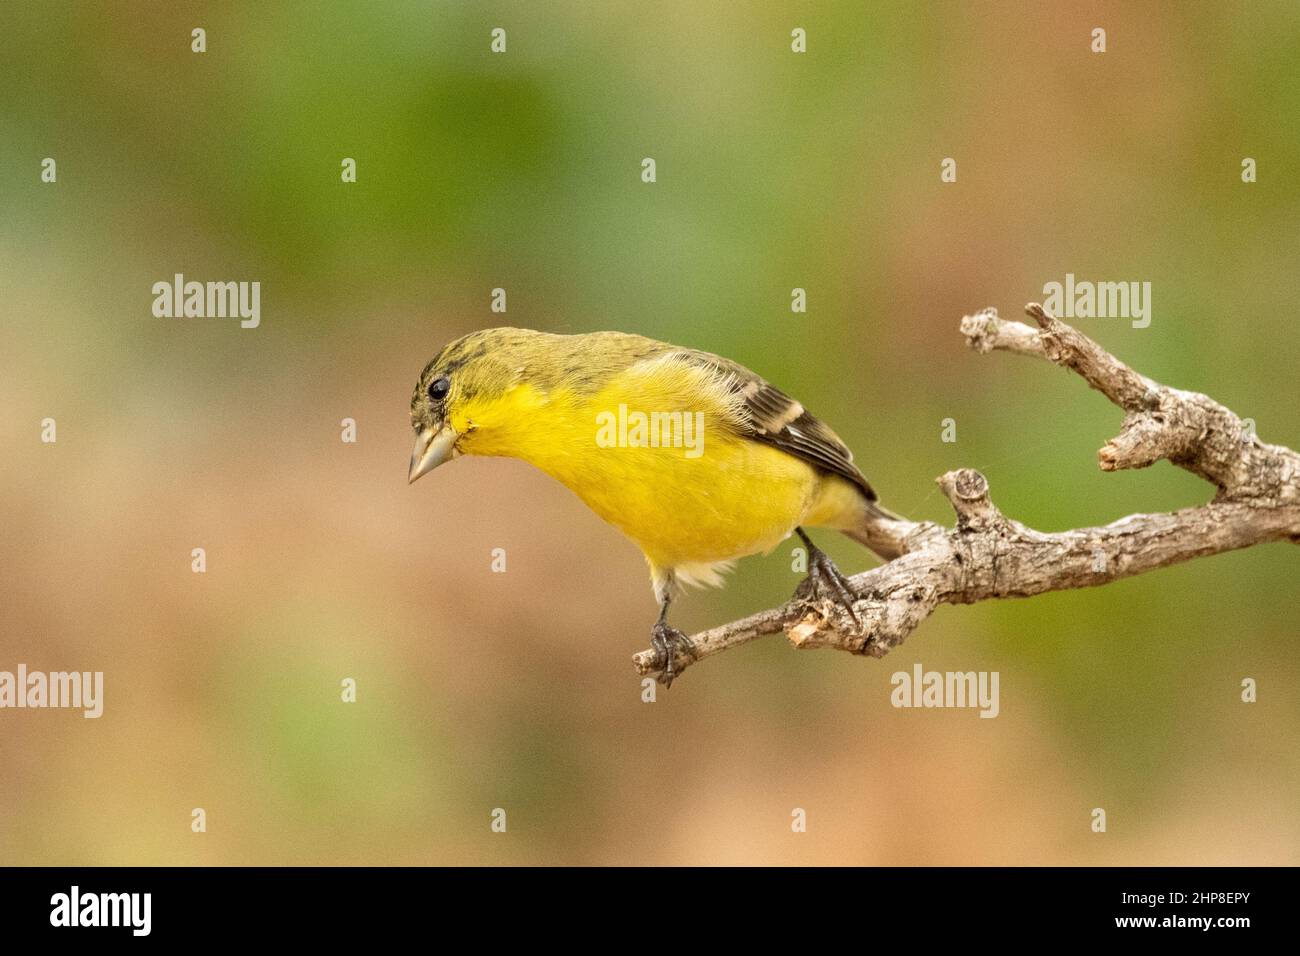 American Goldfinch Carduelis tristis a North American wide ranging wild songbird Stock Photo